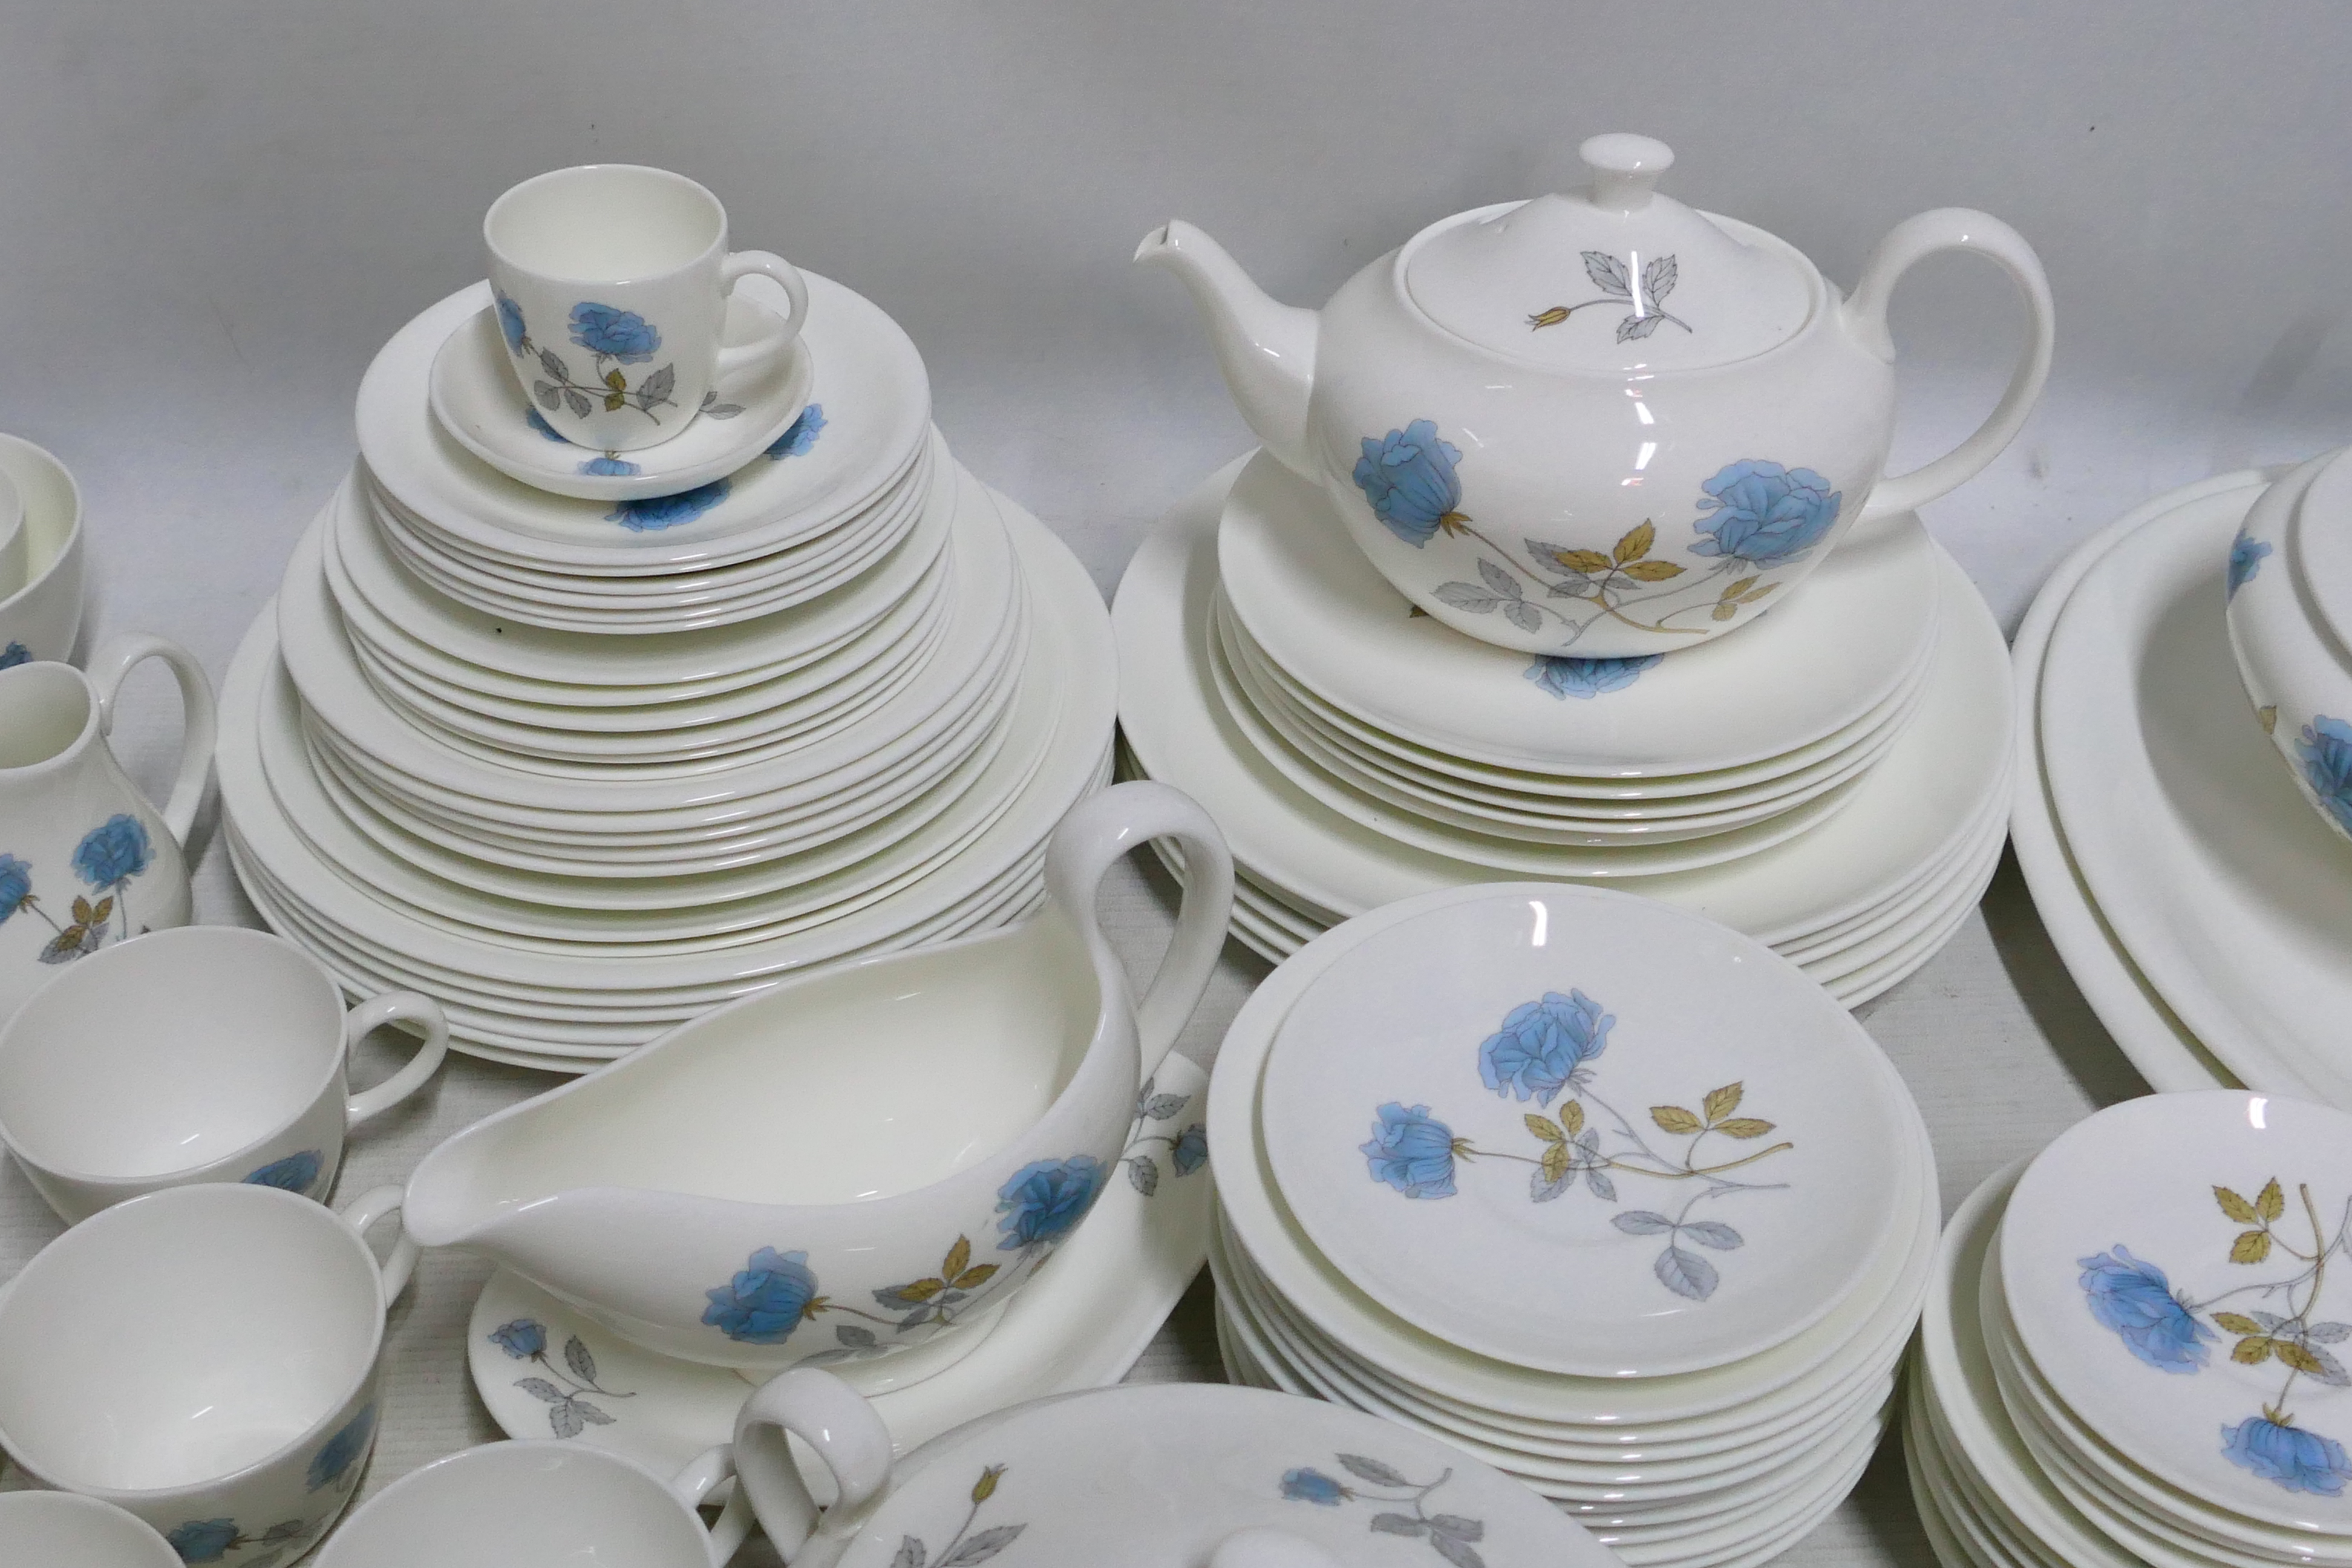 Wedgwood - A large Wedgwood Ice Rose dinner/tea set - Pieces include soup bowls, cream jugs, - Image 4 of 10